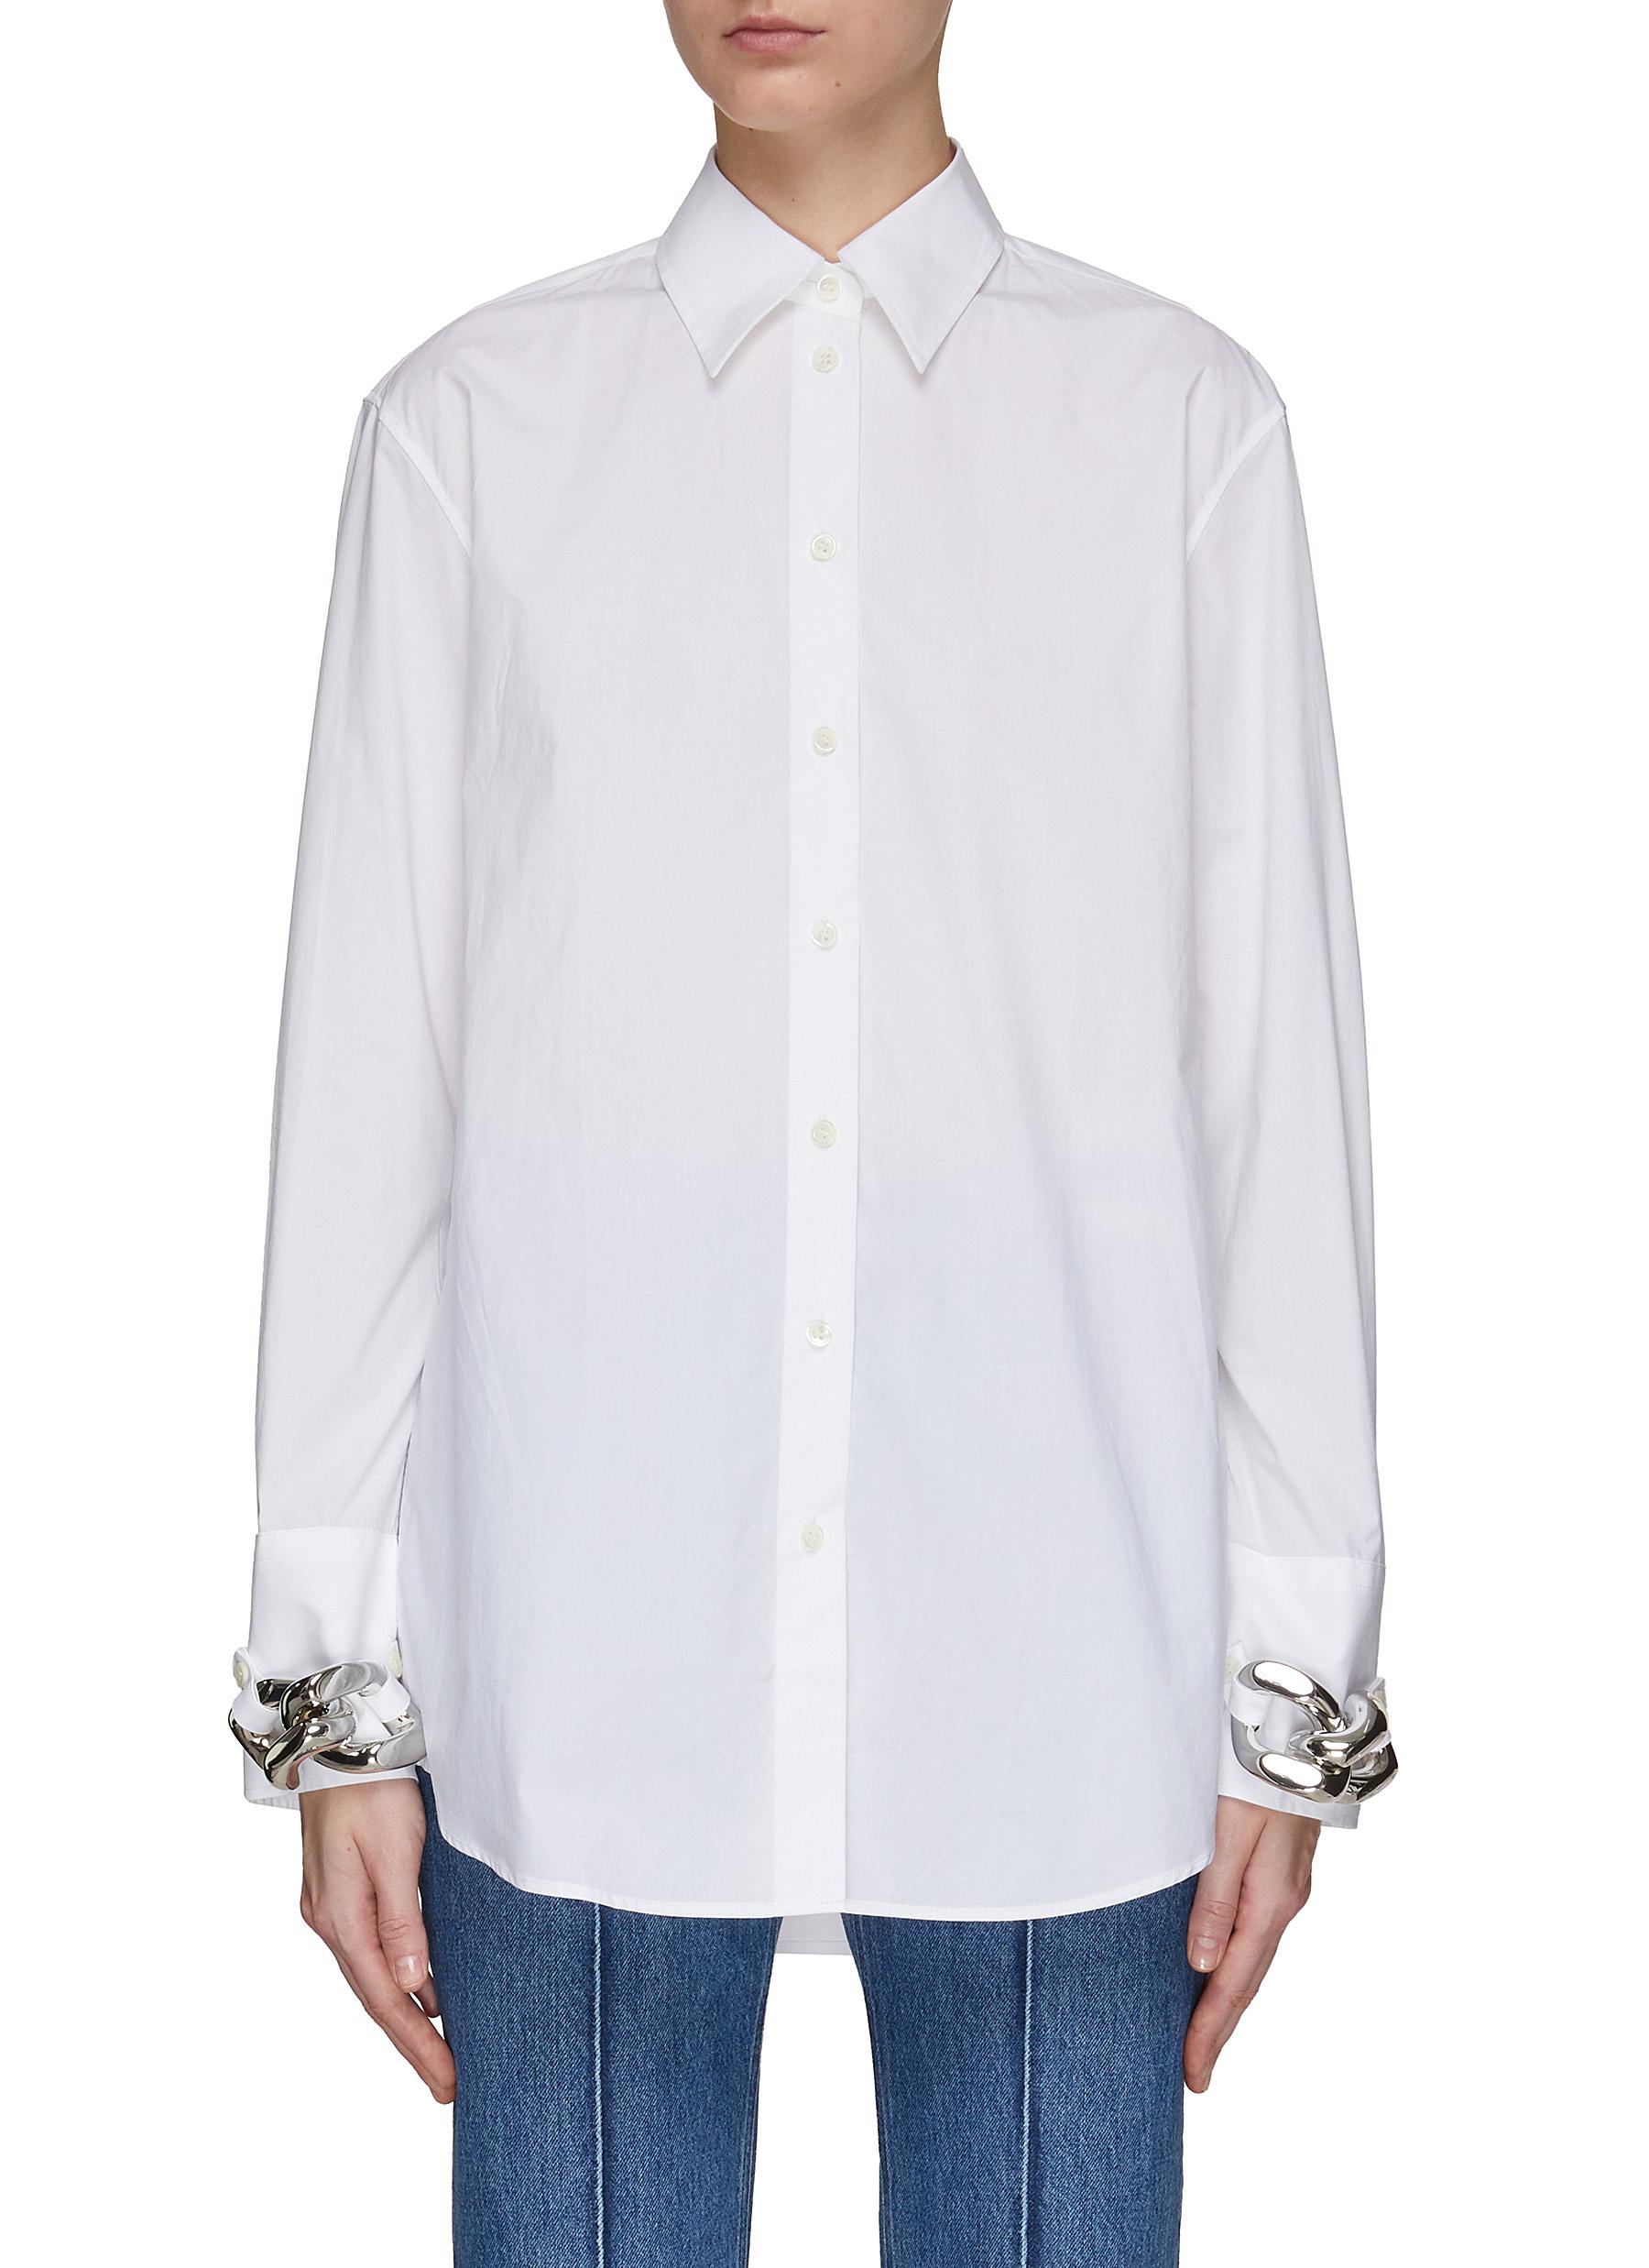 Chain Link Cotton Classic Long-Sleeved Shirt